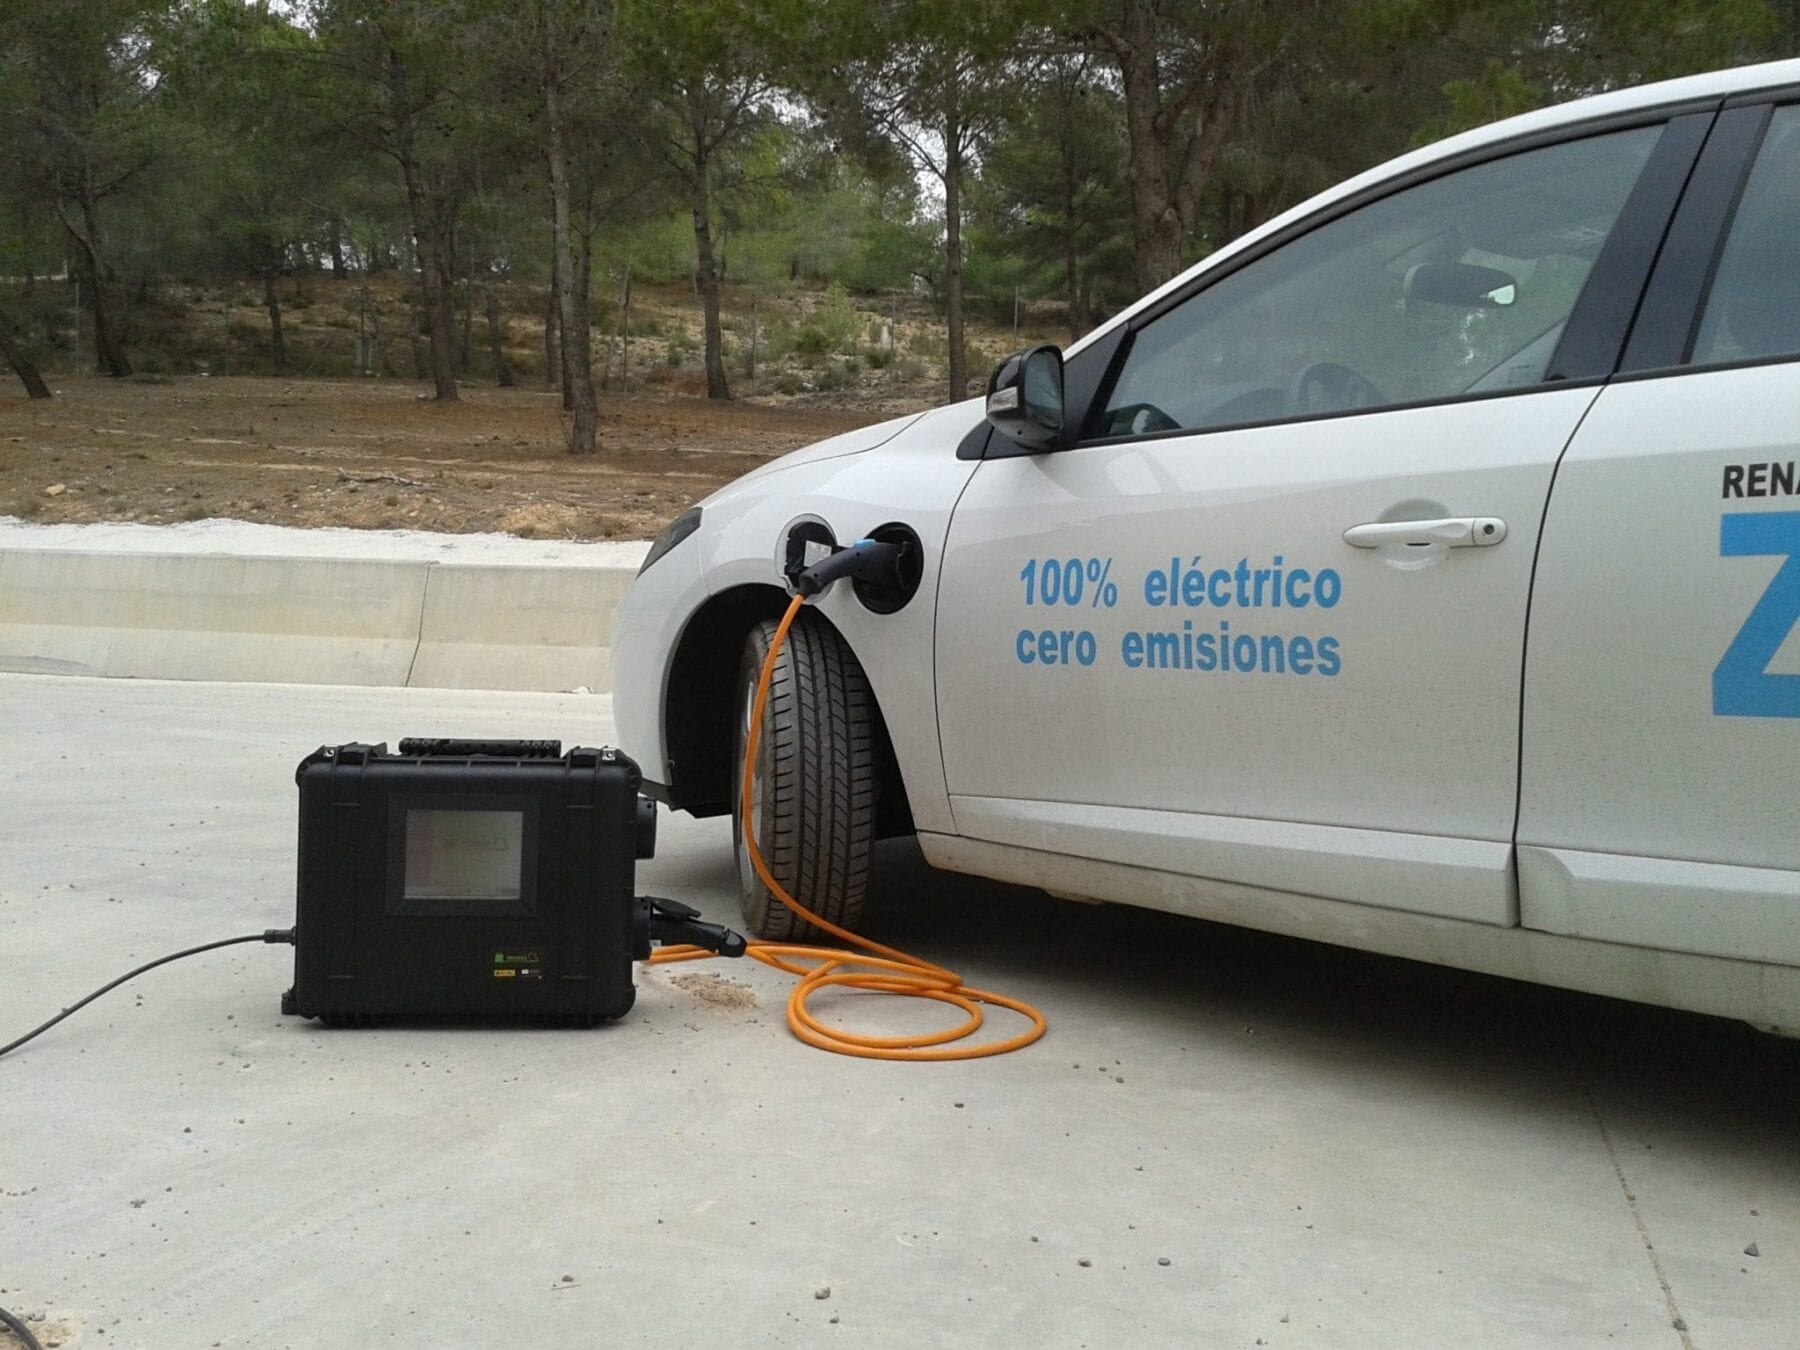 Researchers develop the first mobile charging system for electric vehicles